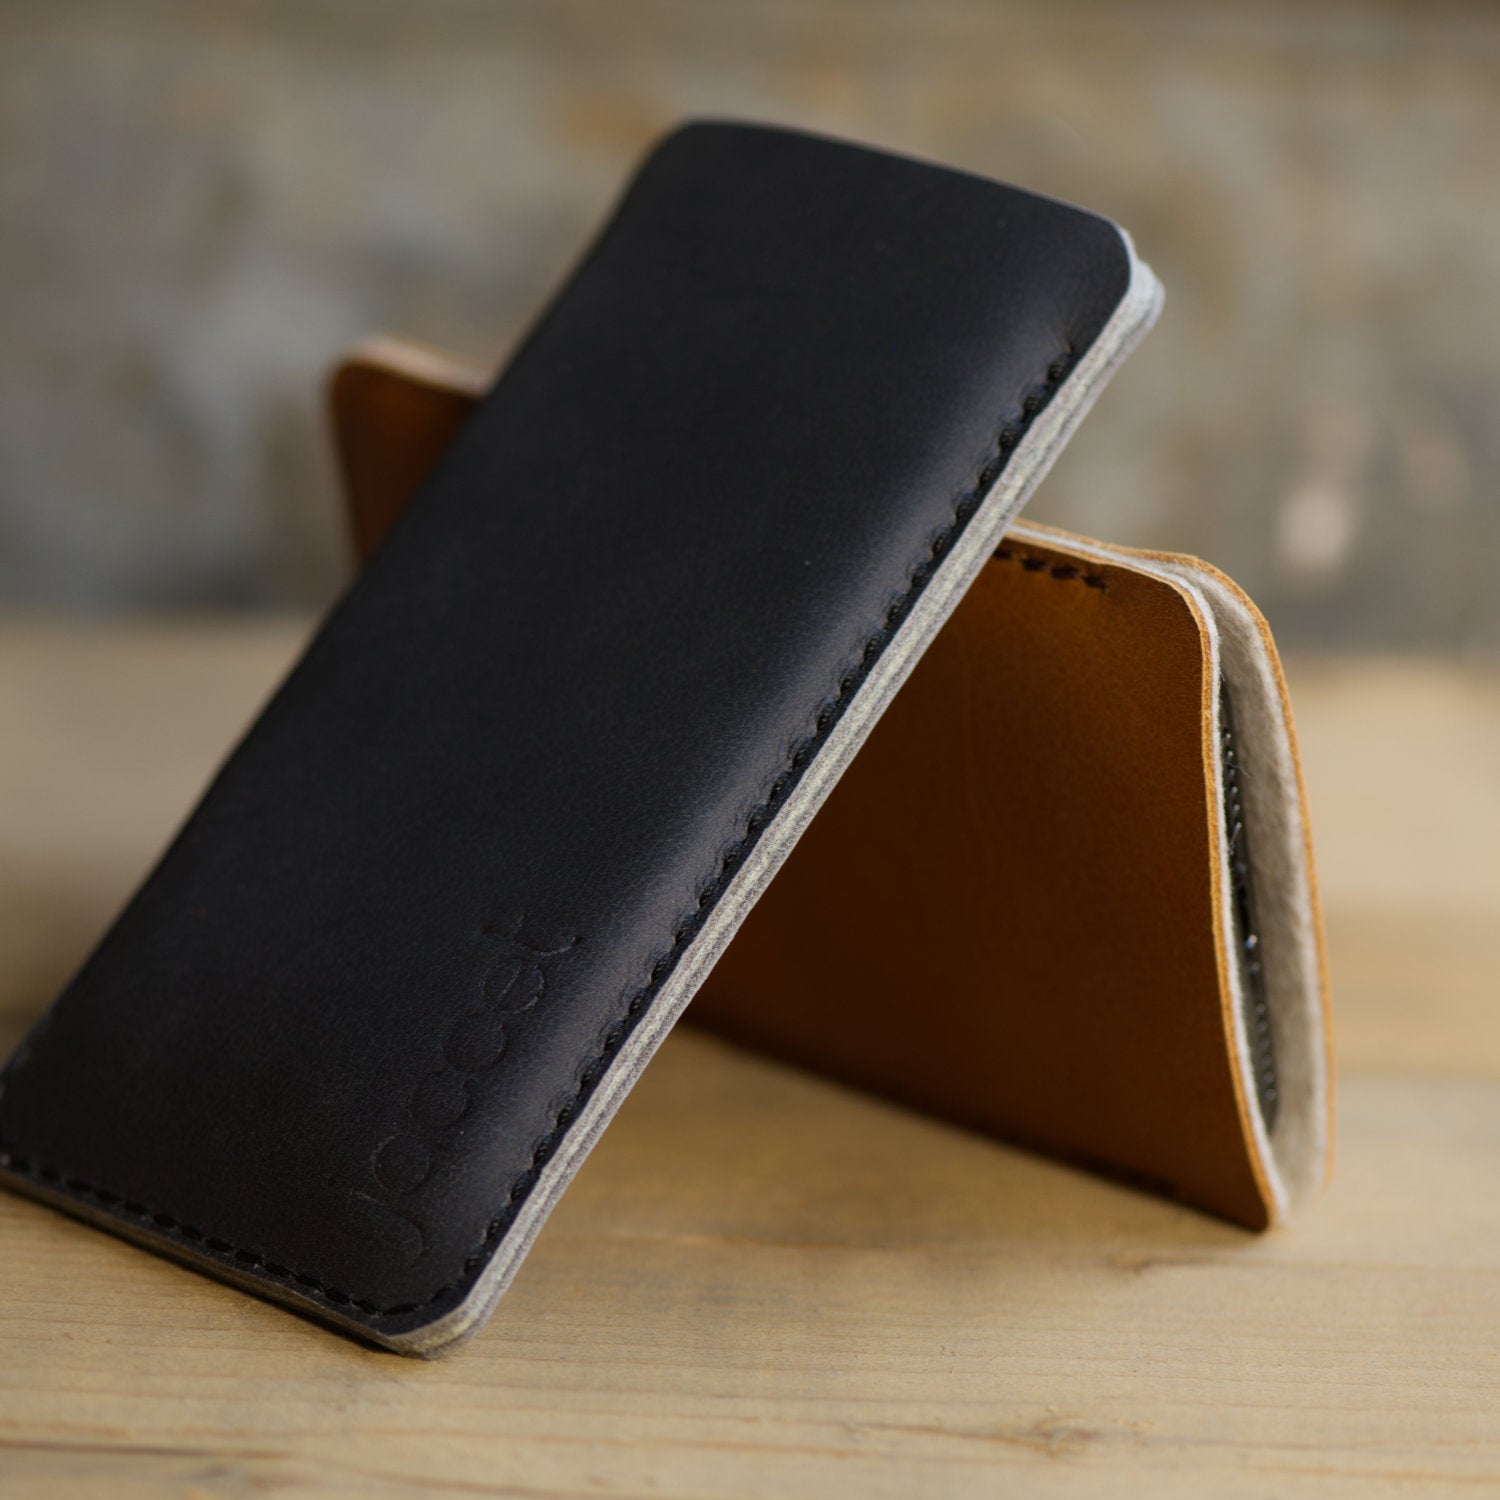 JACCET leather Google Pixel sleeve - anthracite/black leather with grey wool felt. 100% Handmade